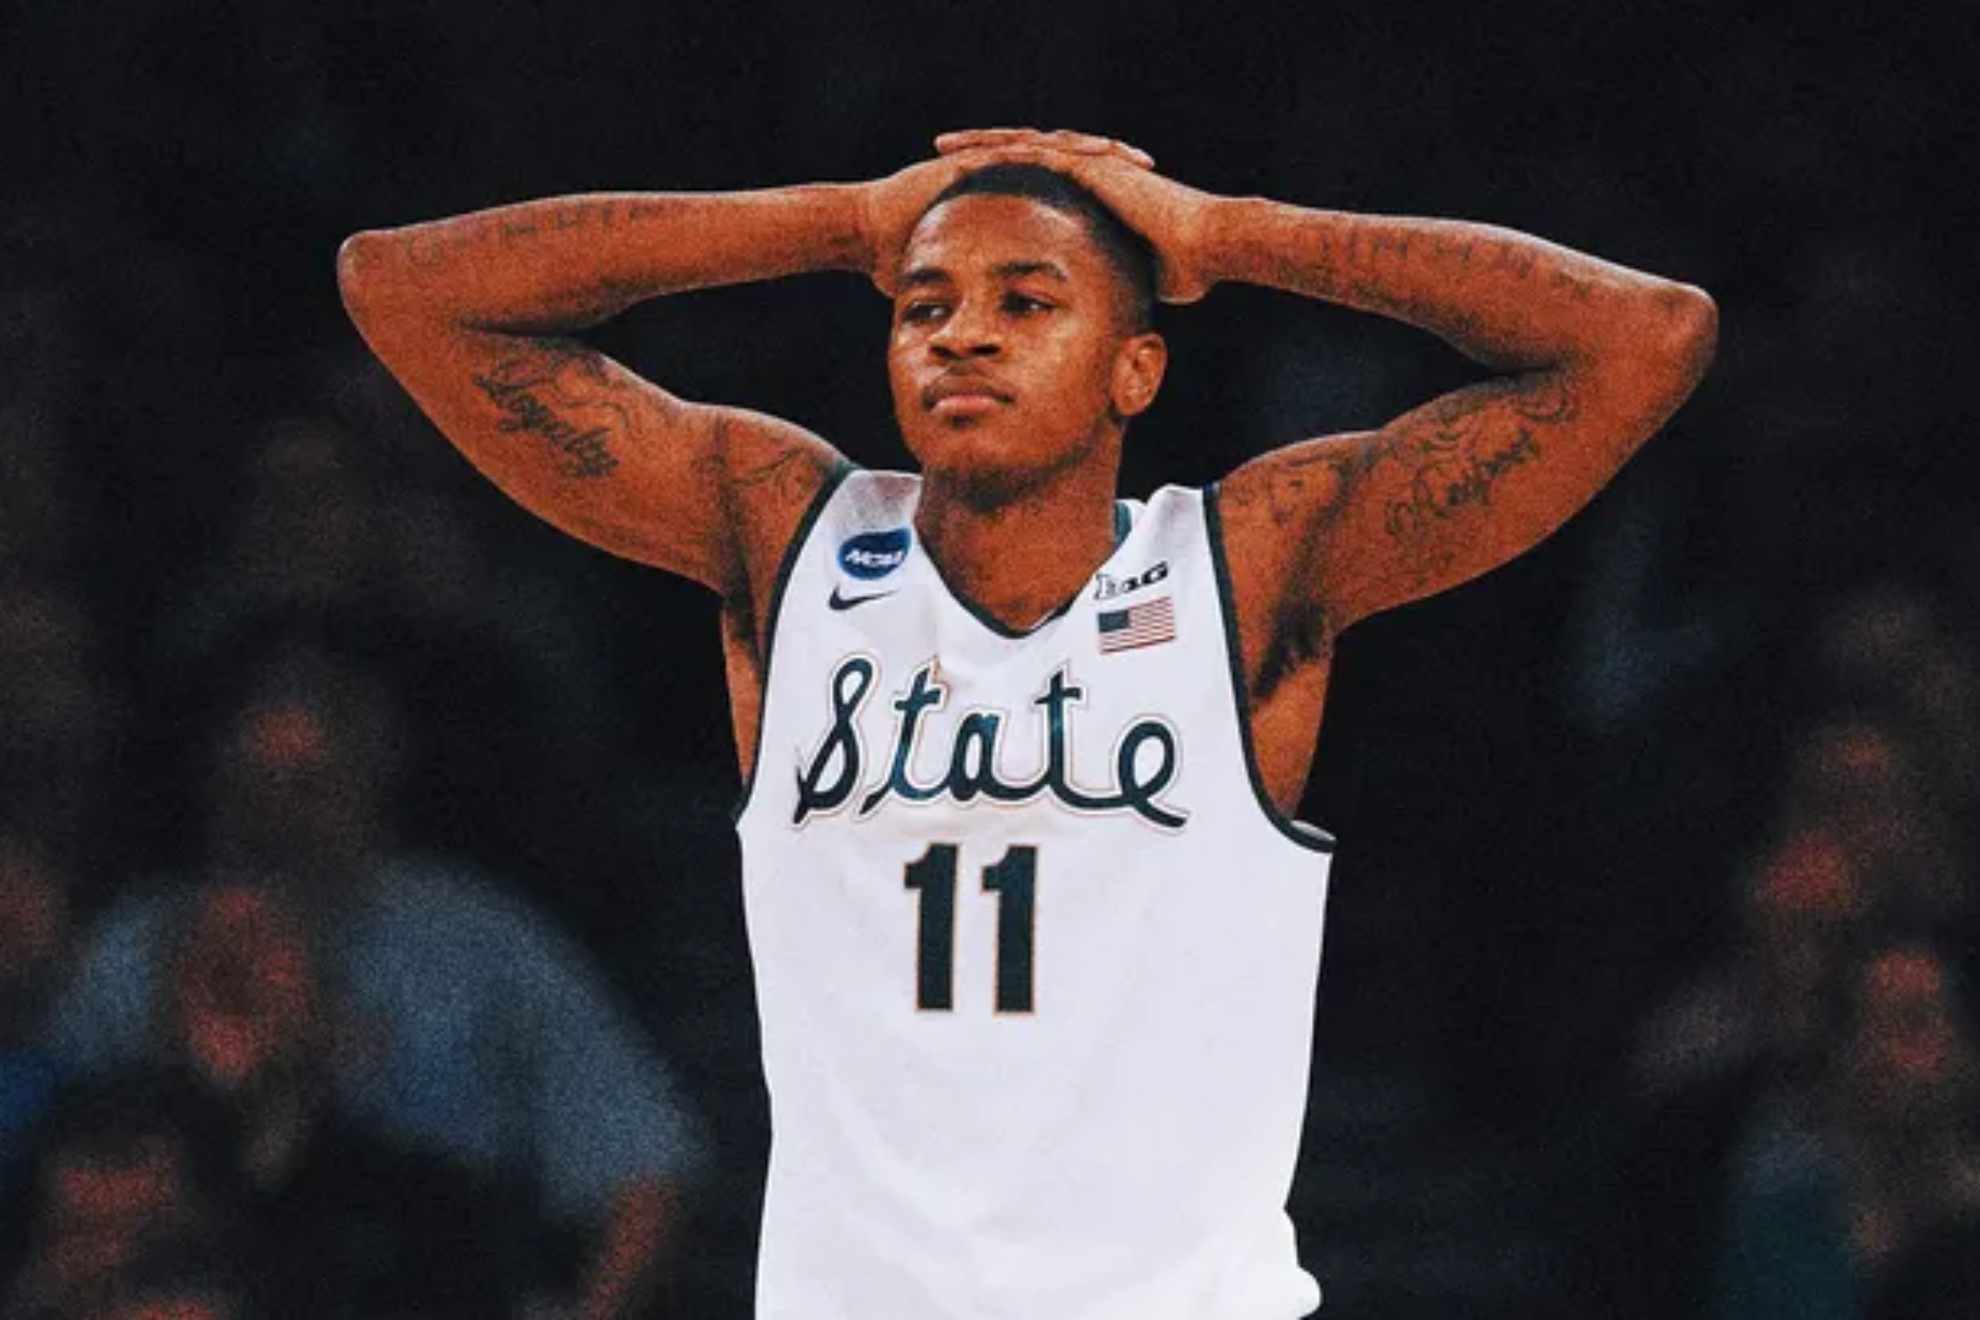 Keith Appling, during his playing years at Michigan State University (2010-14).